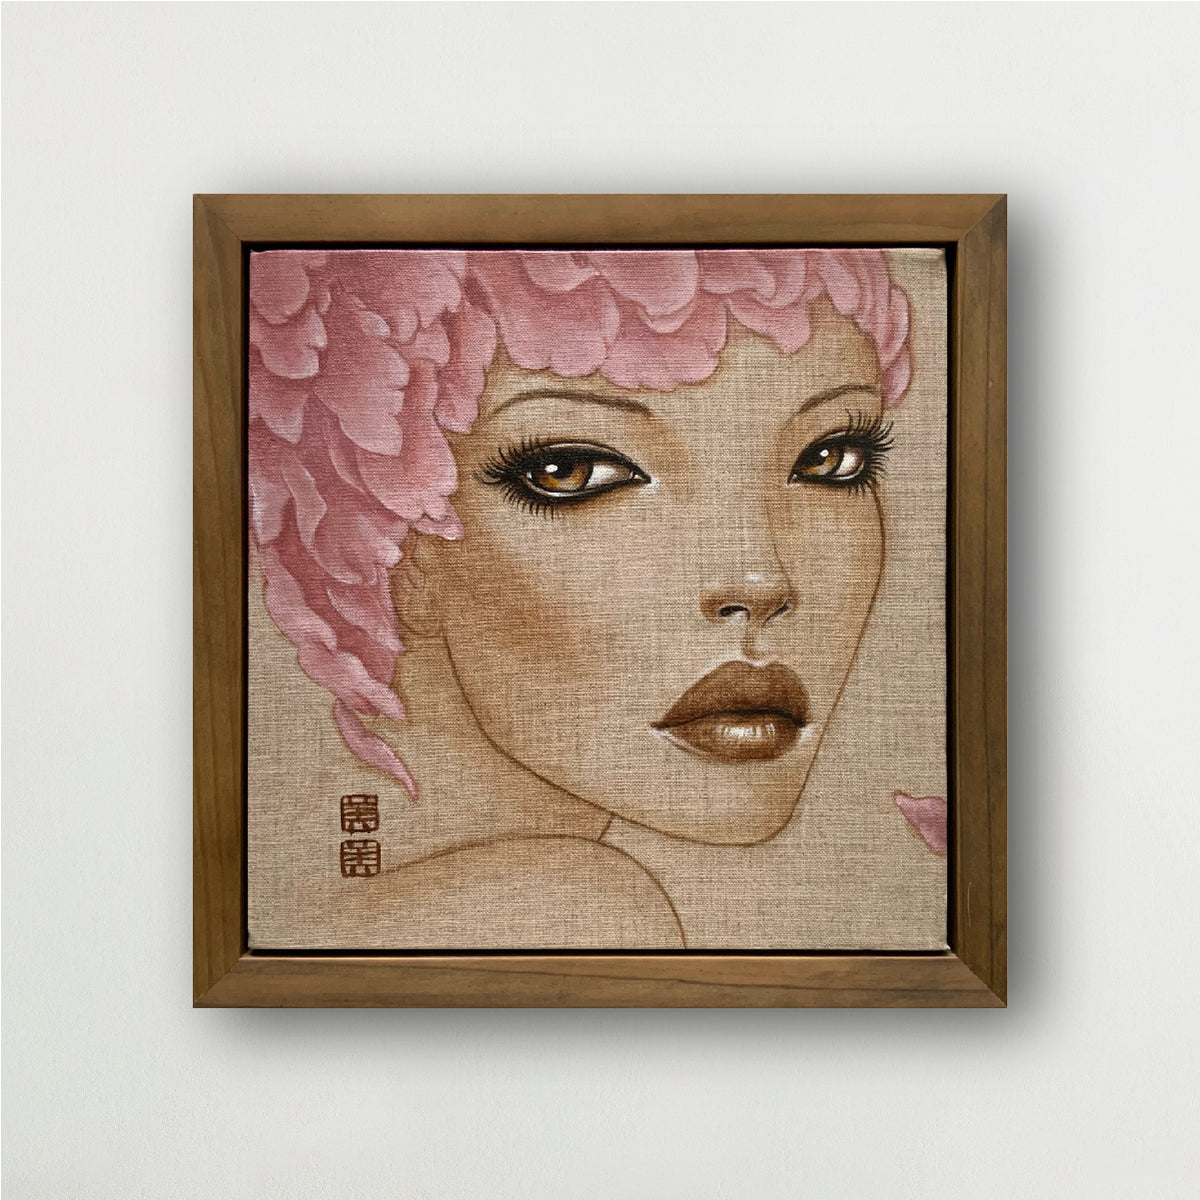 framed painting of a woman's face - she has large eyes and lips and is wearing a feather hat